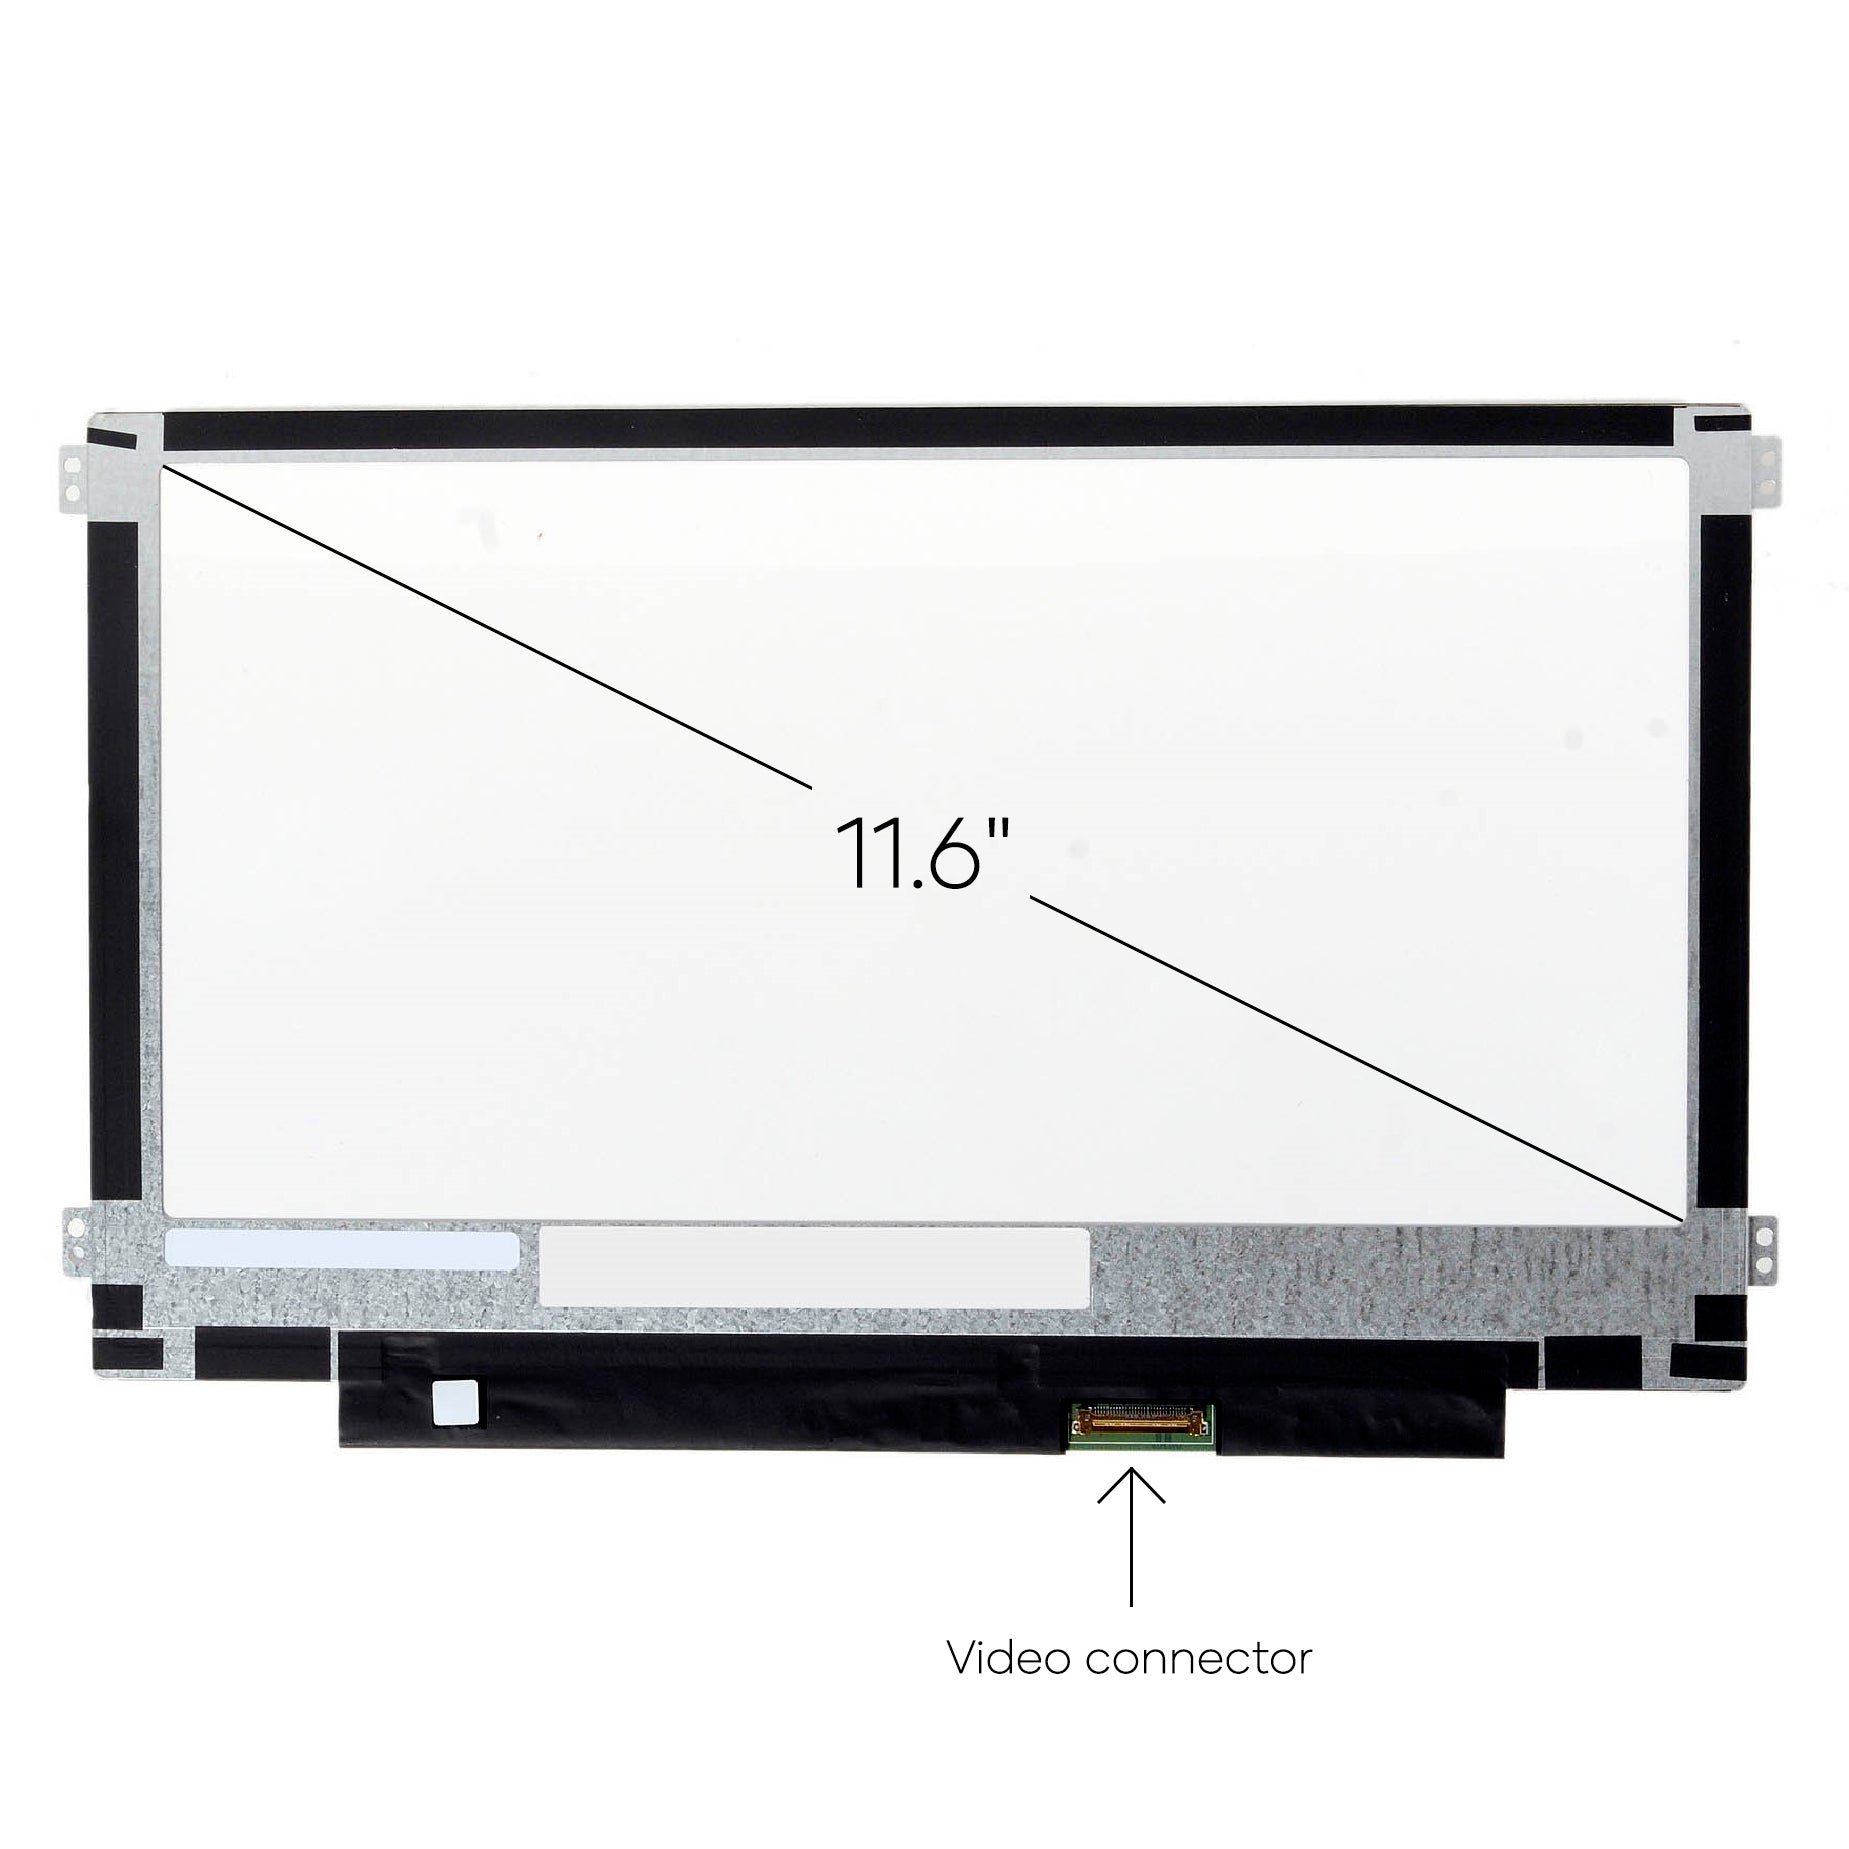 Screen Replacement for Lenovo Chromebook 100E 81ER HD 1366x768 Matte LCD LED Display